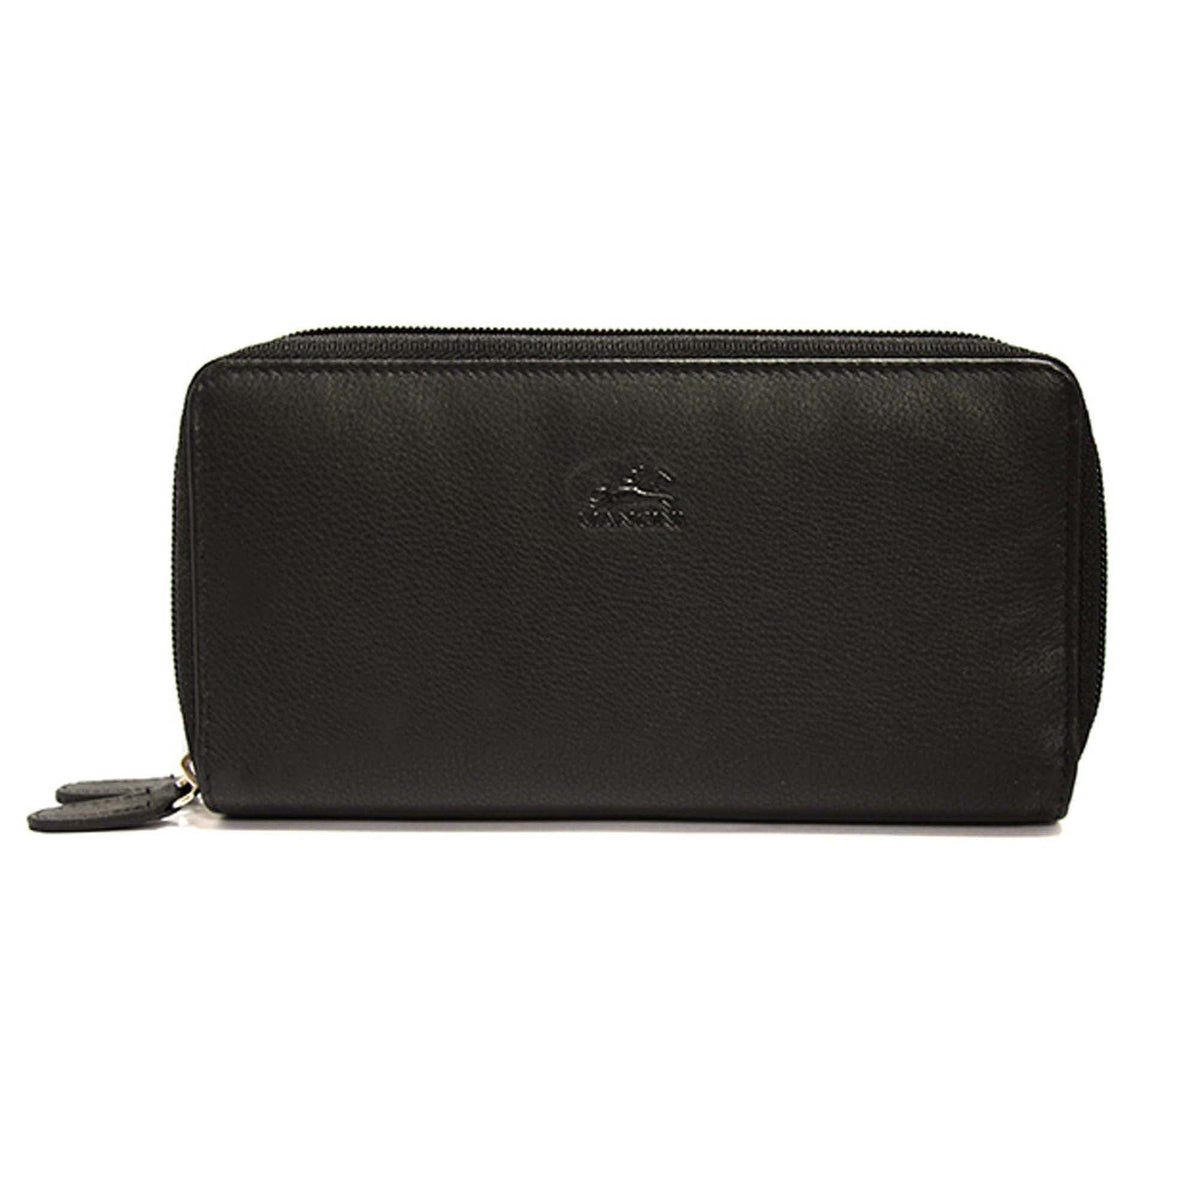 Mancini Boulder Men's RFID Secure Billfold with Removable Passcase